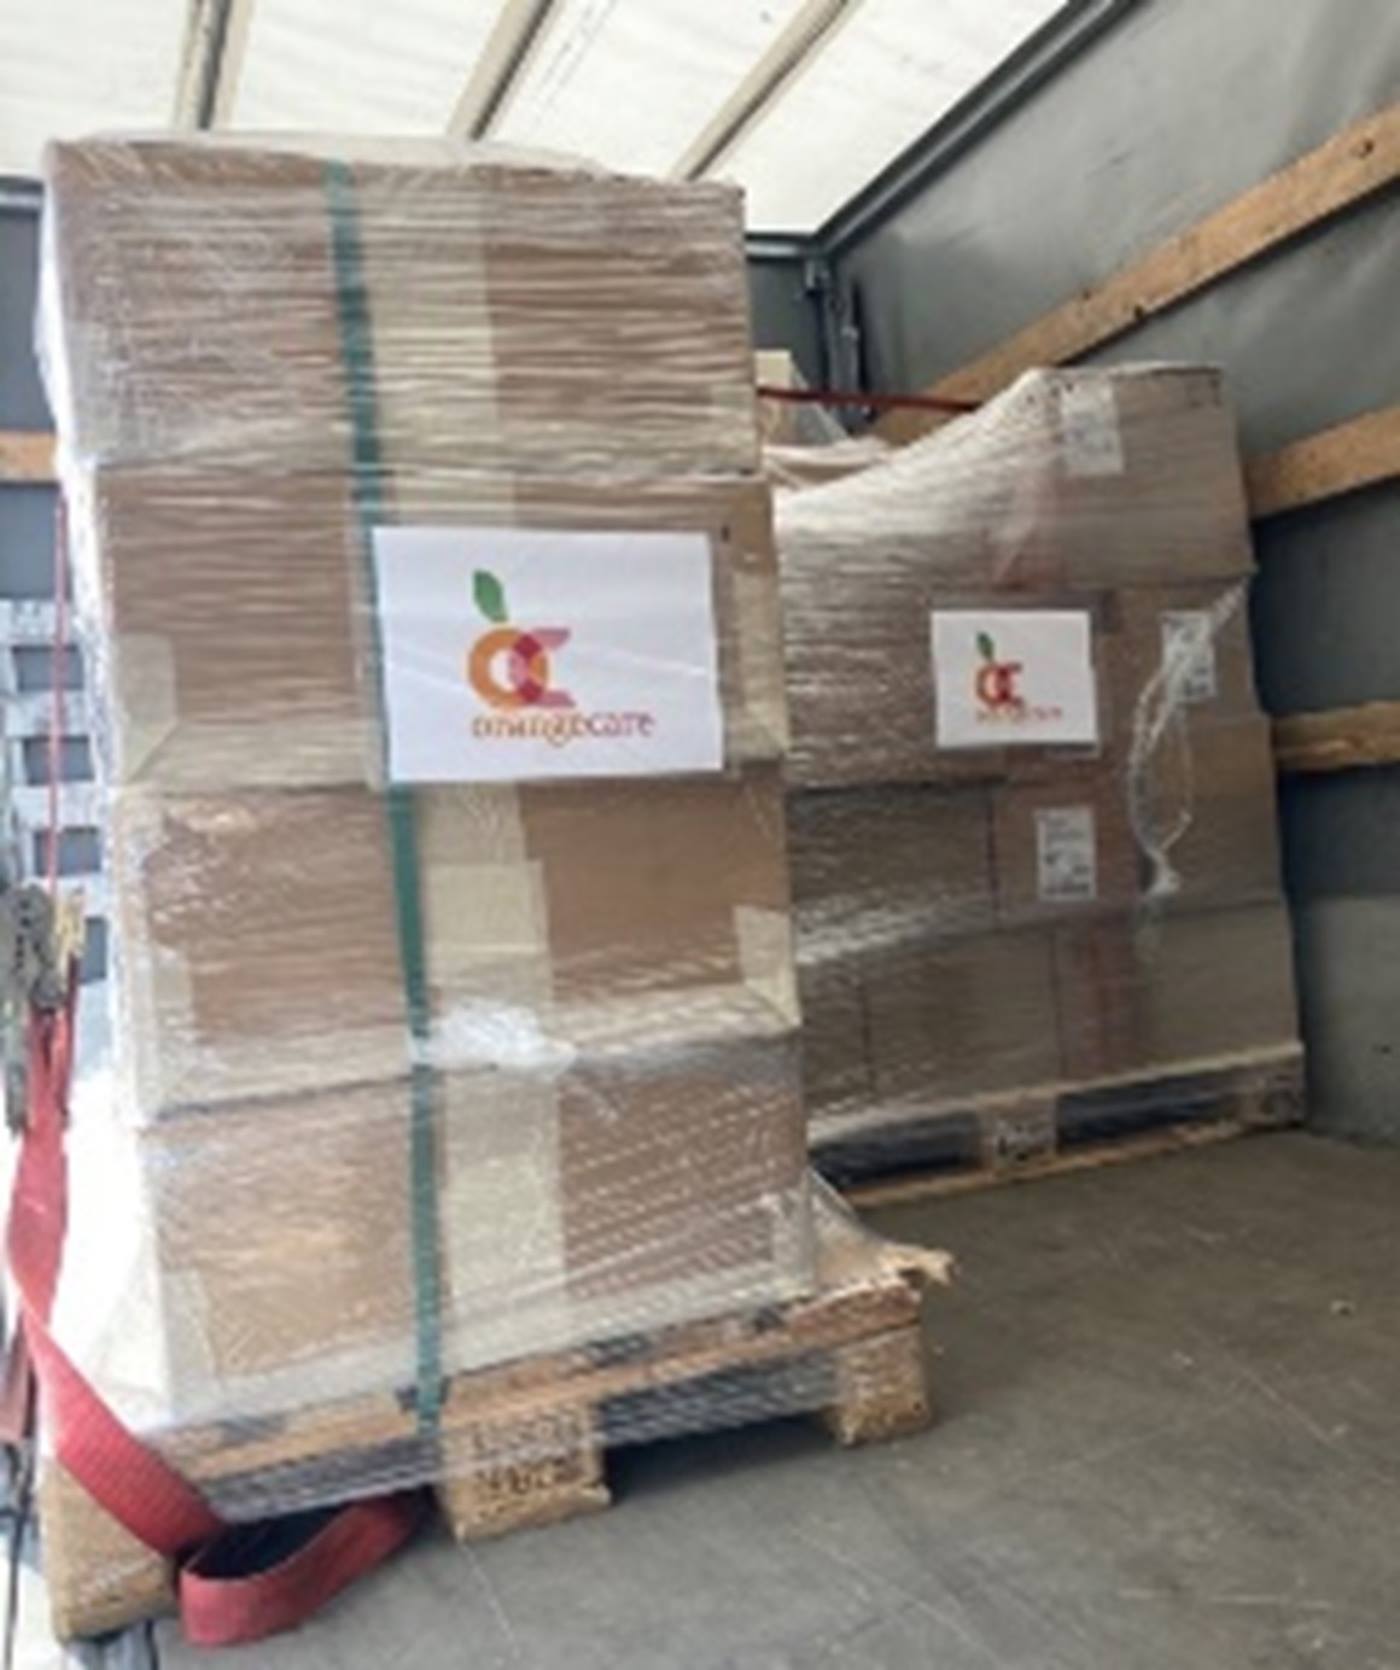 Two pallets full of cardboard boxes with relief supplies, marked with an Orange Care logo, are loaded onto a truck. 